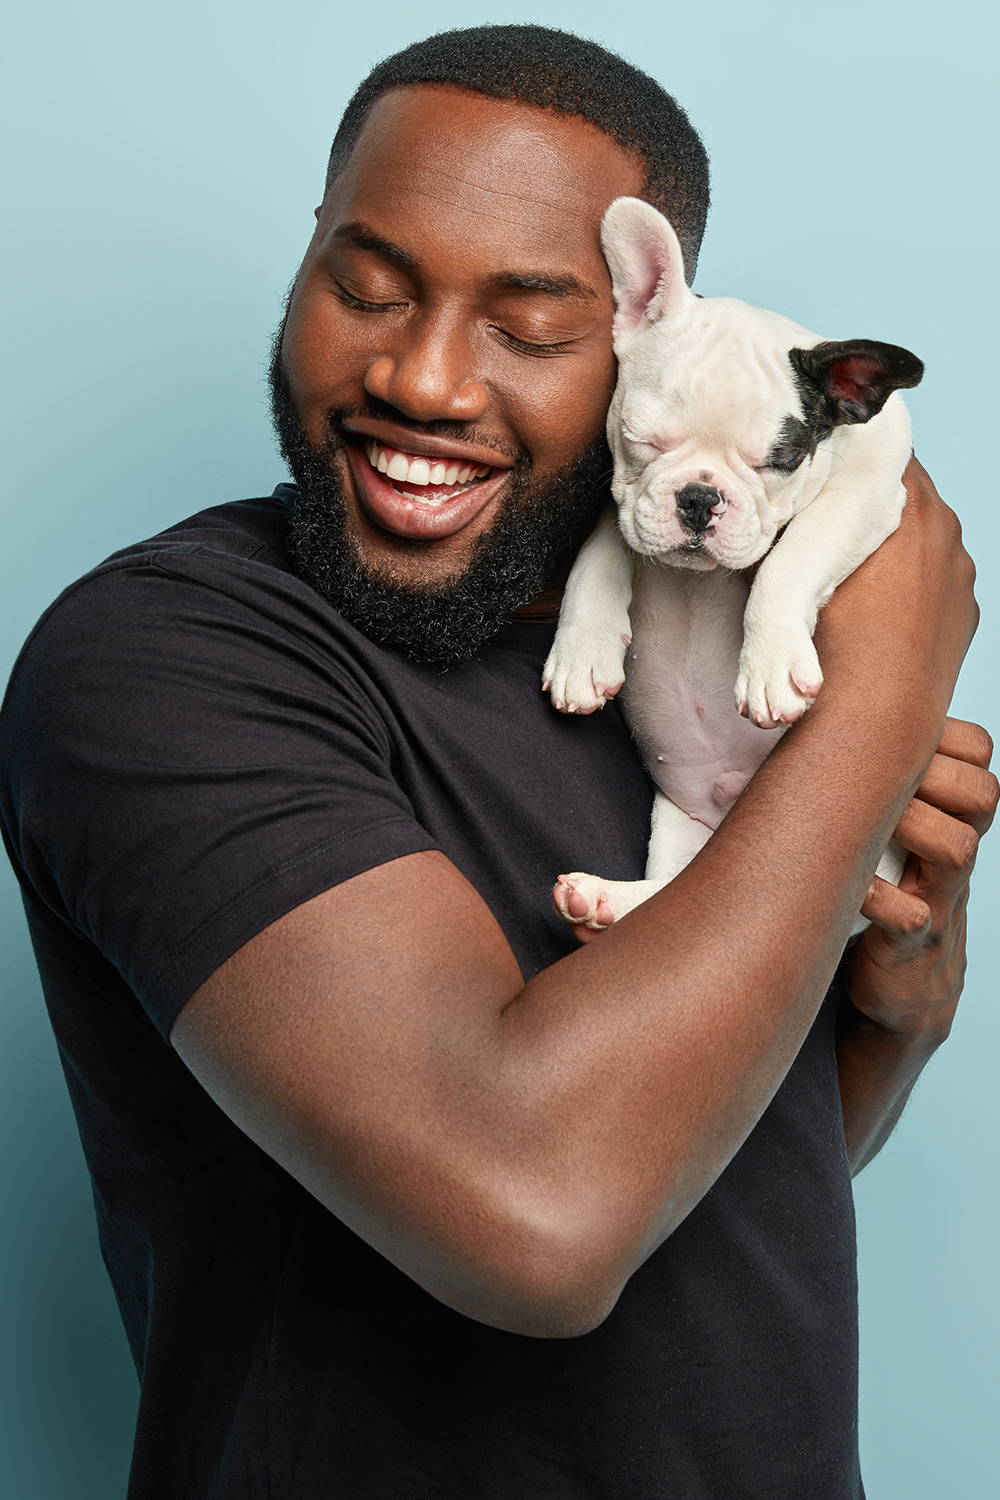 Man Hugging A Small Black And White Dog